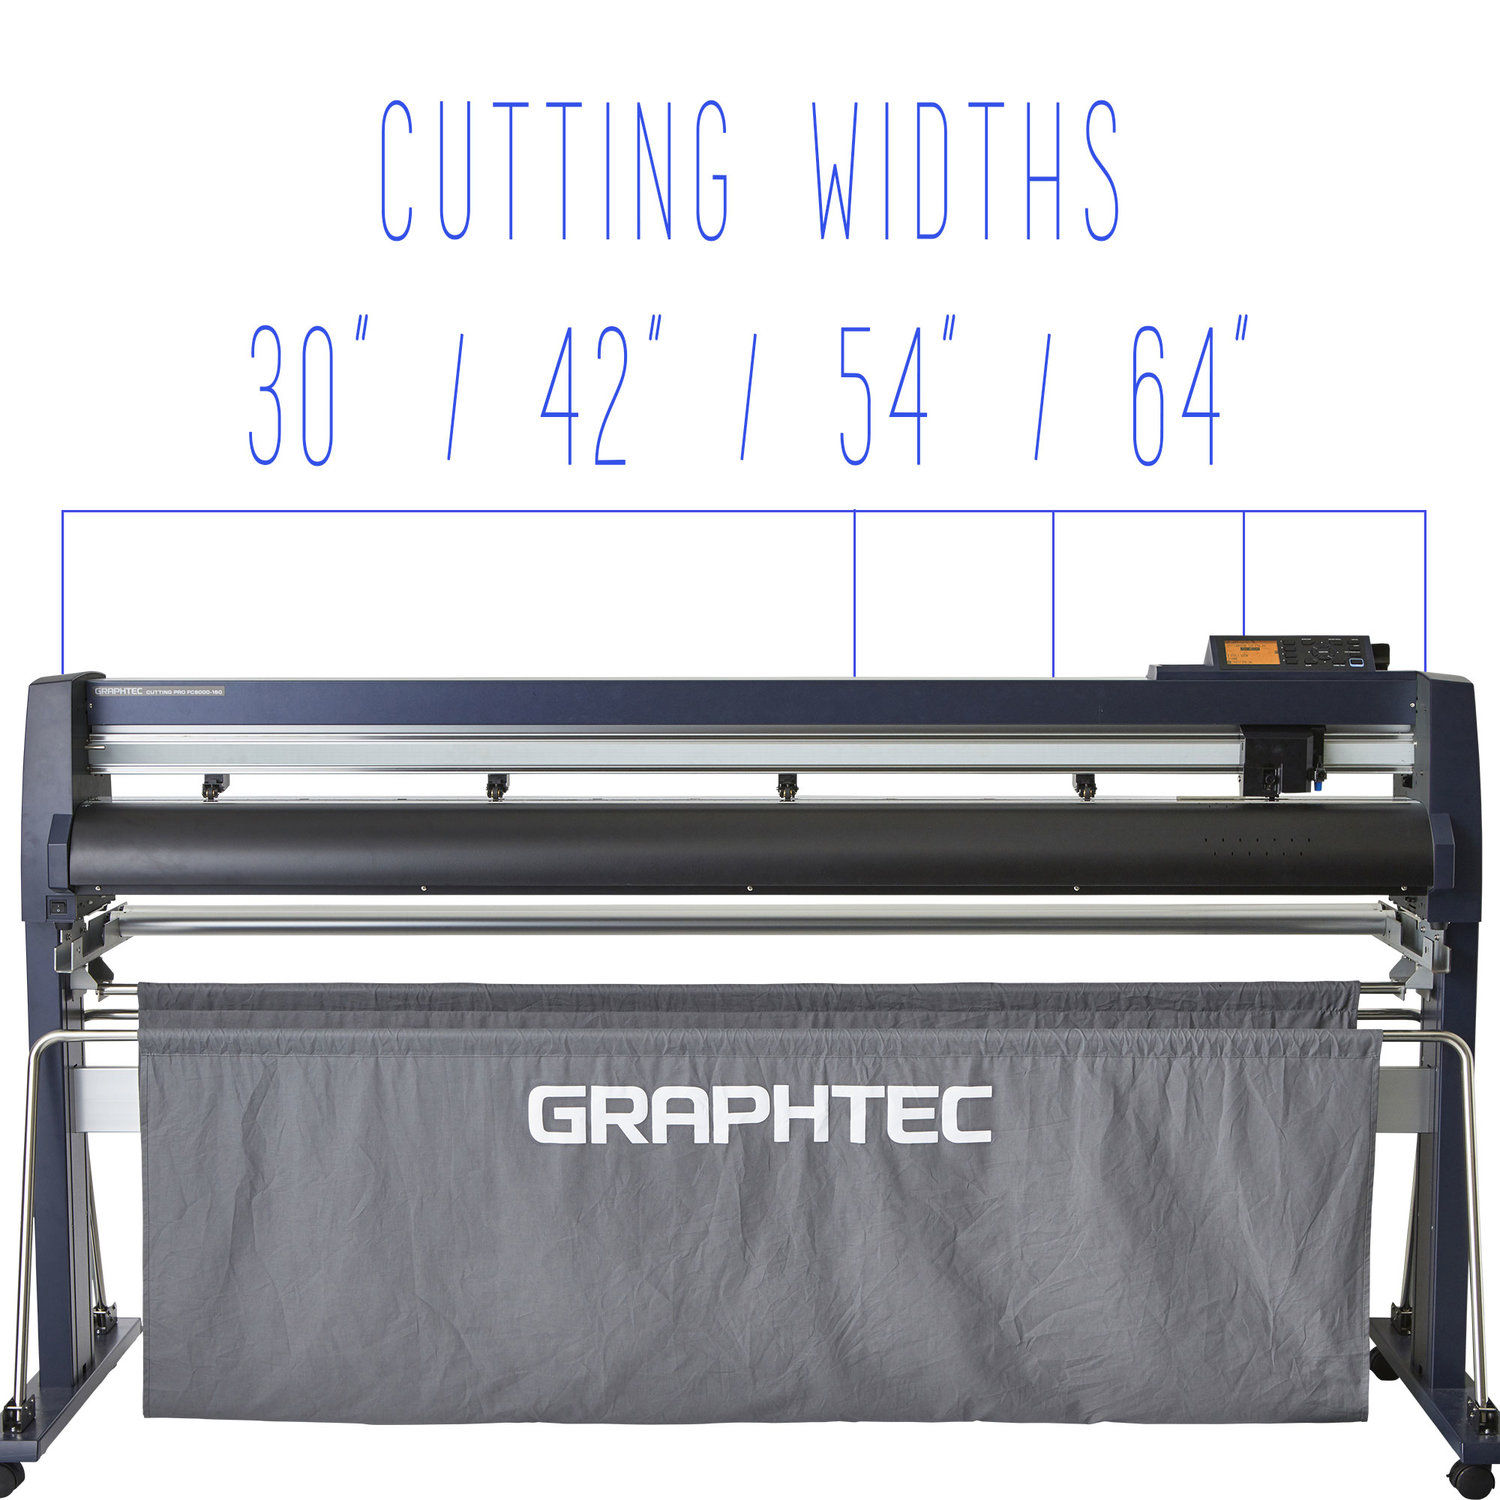 Graphtec 64" Roll Feed Wide Cutter (FC9000-160)